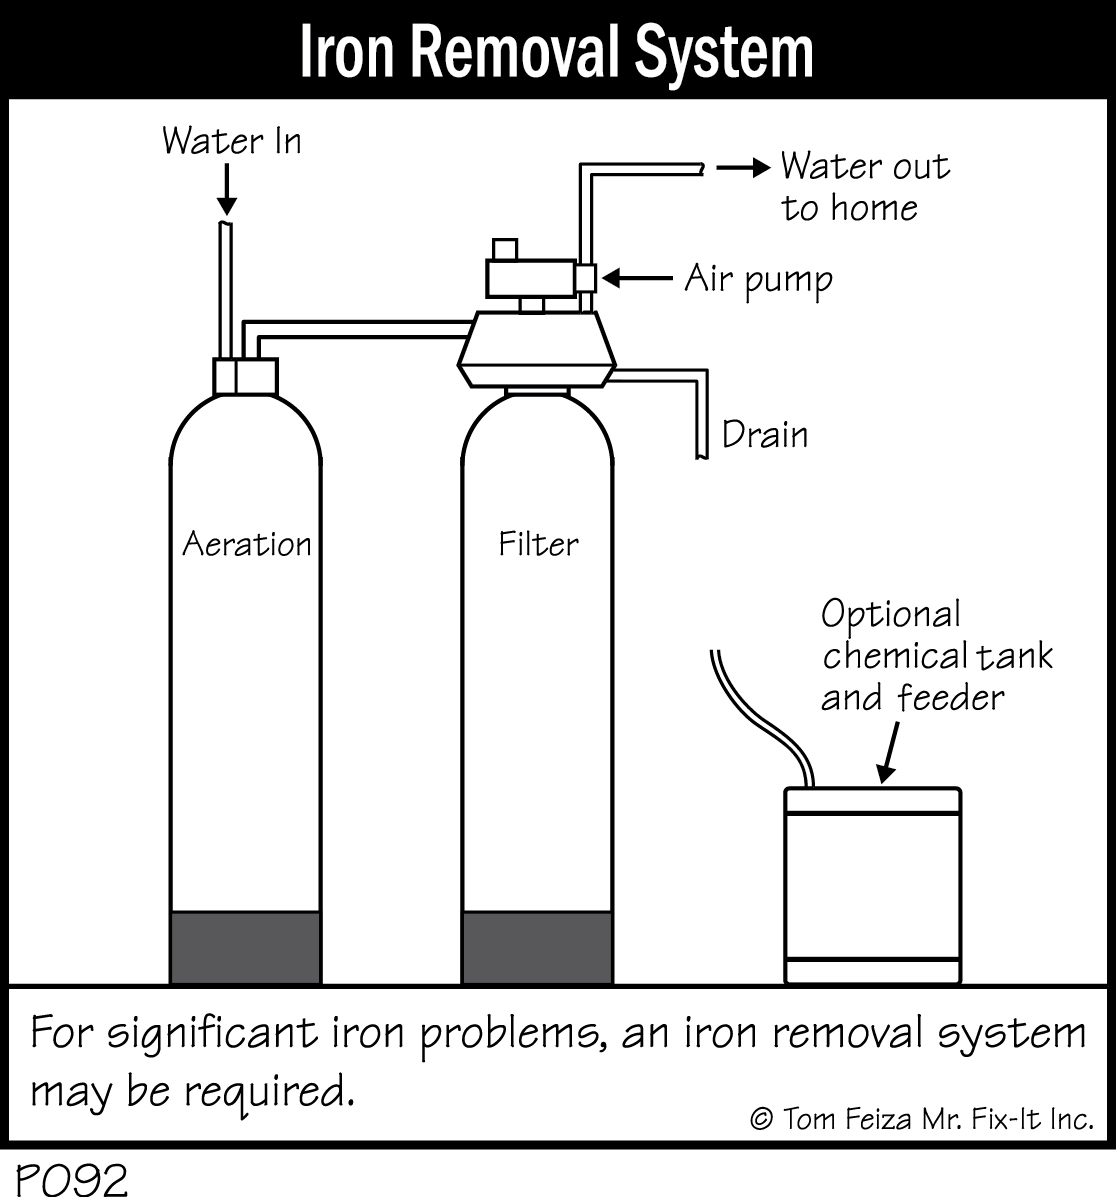 P092 - Iron Removal System